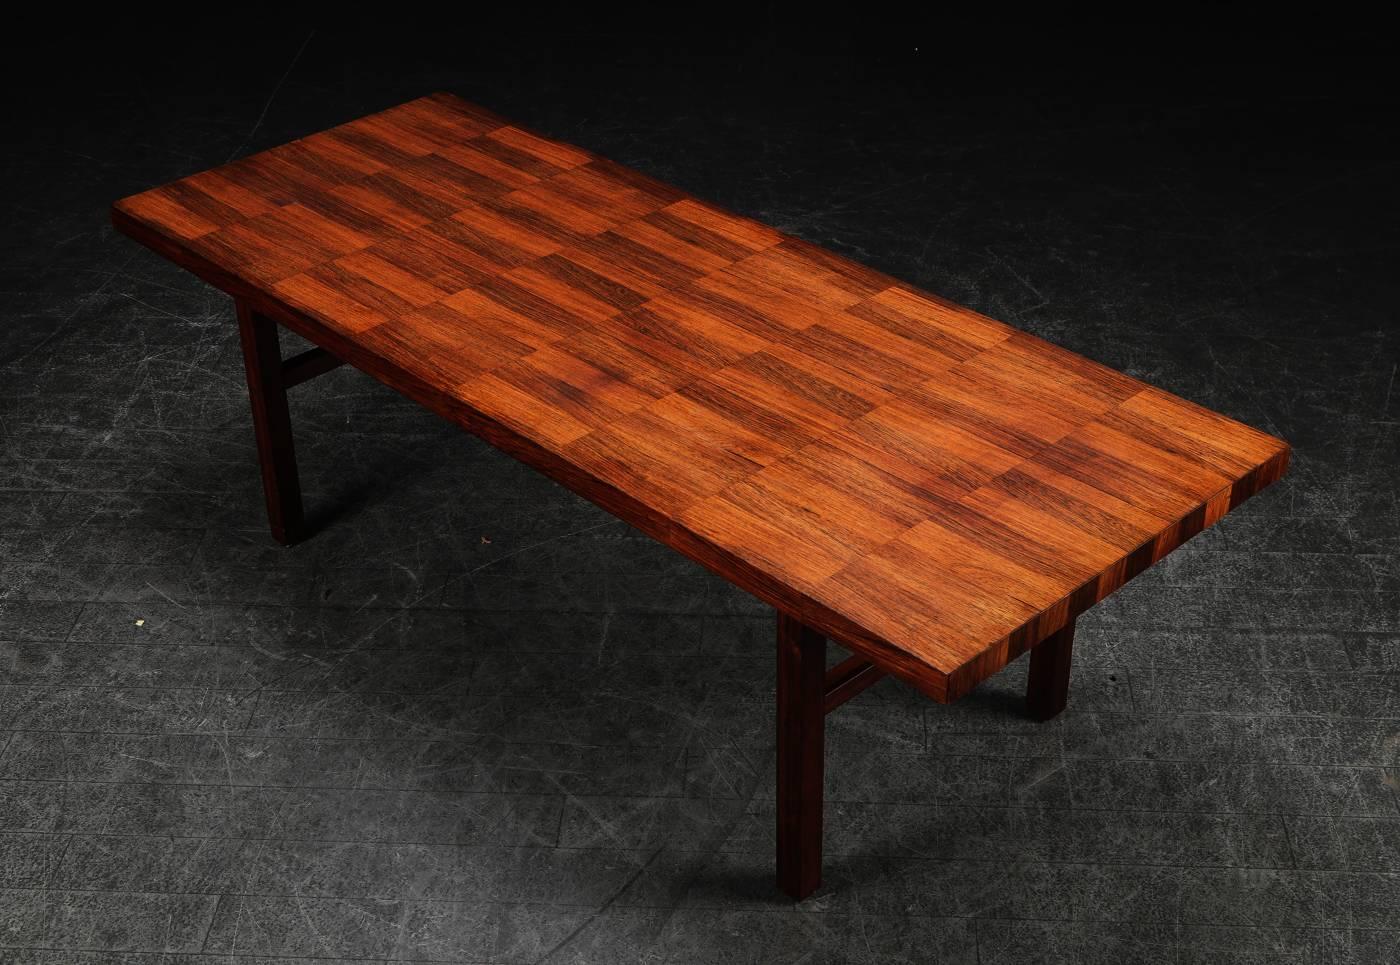 Hardwood patchwork coffee table designed by Bramin Møbelfabrik. The table is in very good vintage condition.